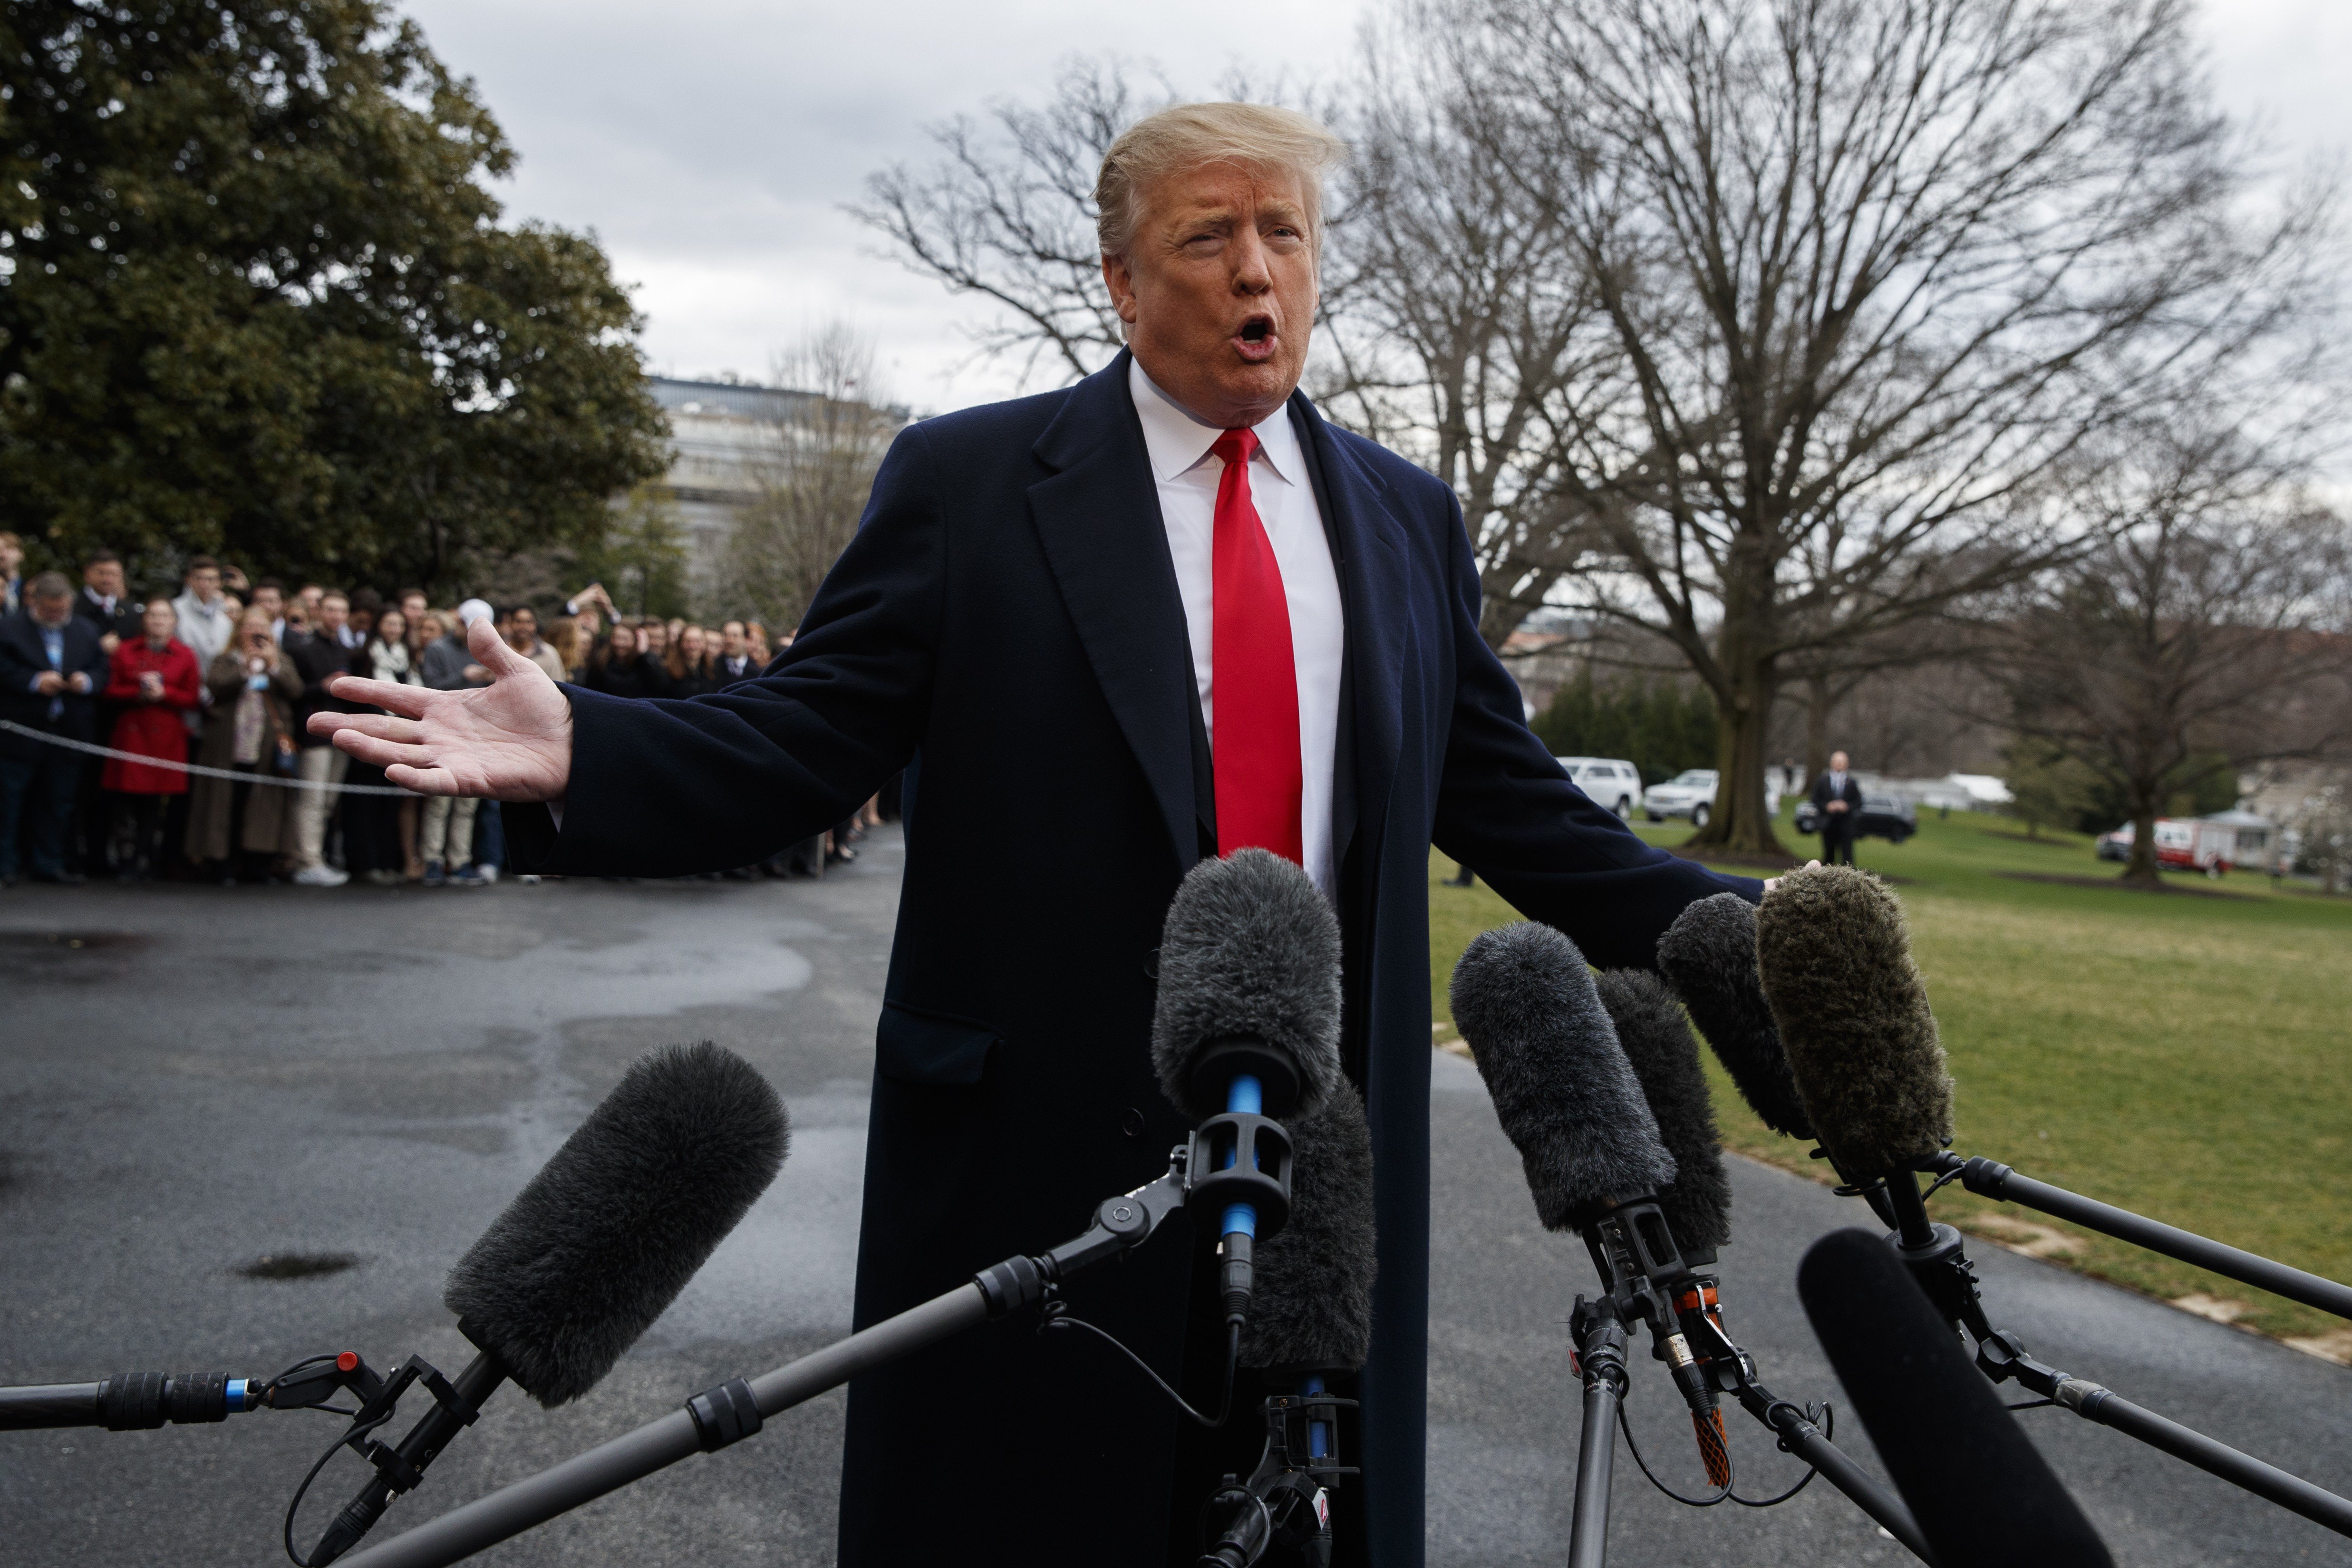 President Donald Trump has claimed victory since the conclusion of the Mueller report resulted in no indictments for collusion with Russia during the 2016 election. Photo: AP